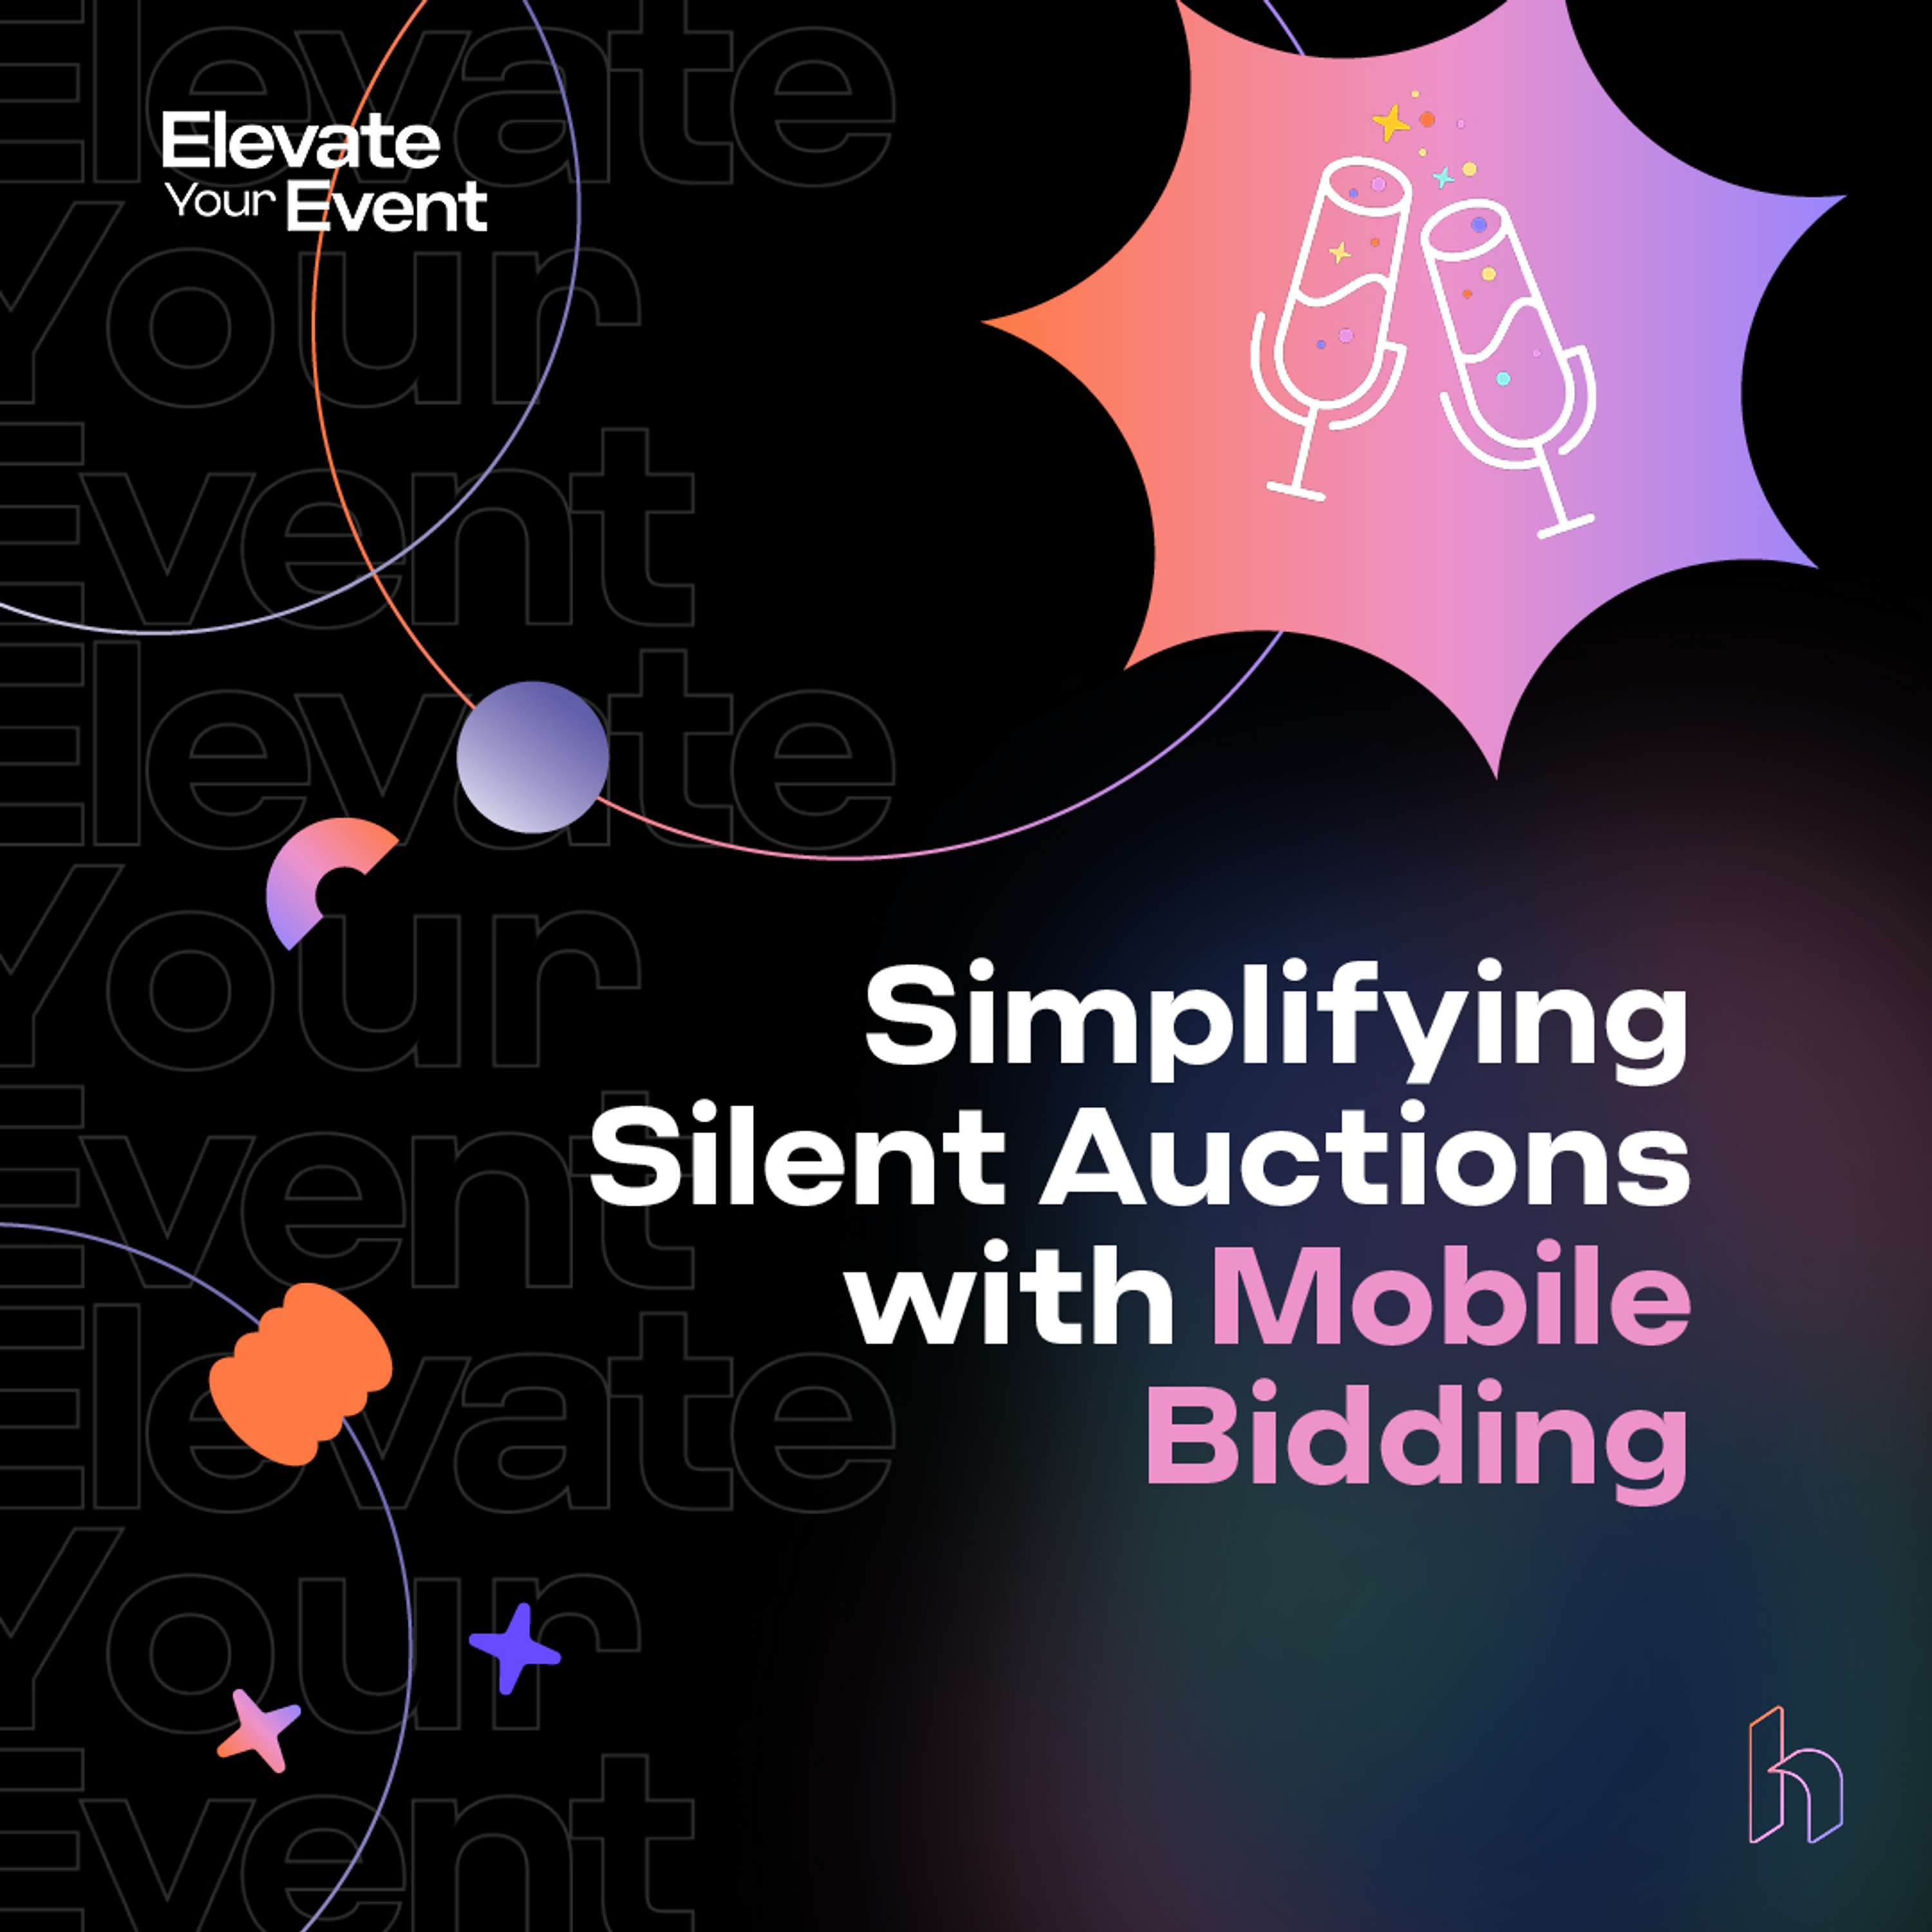 Simplifying Silent Auctions with Mobile Bidding